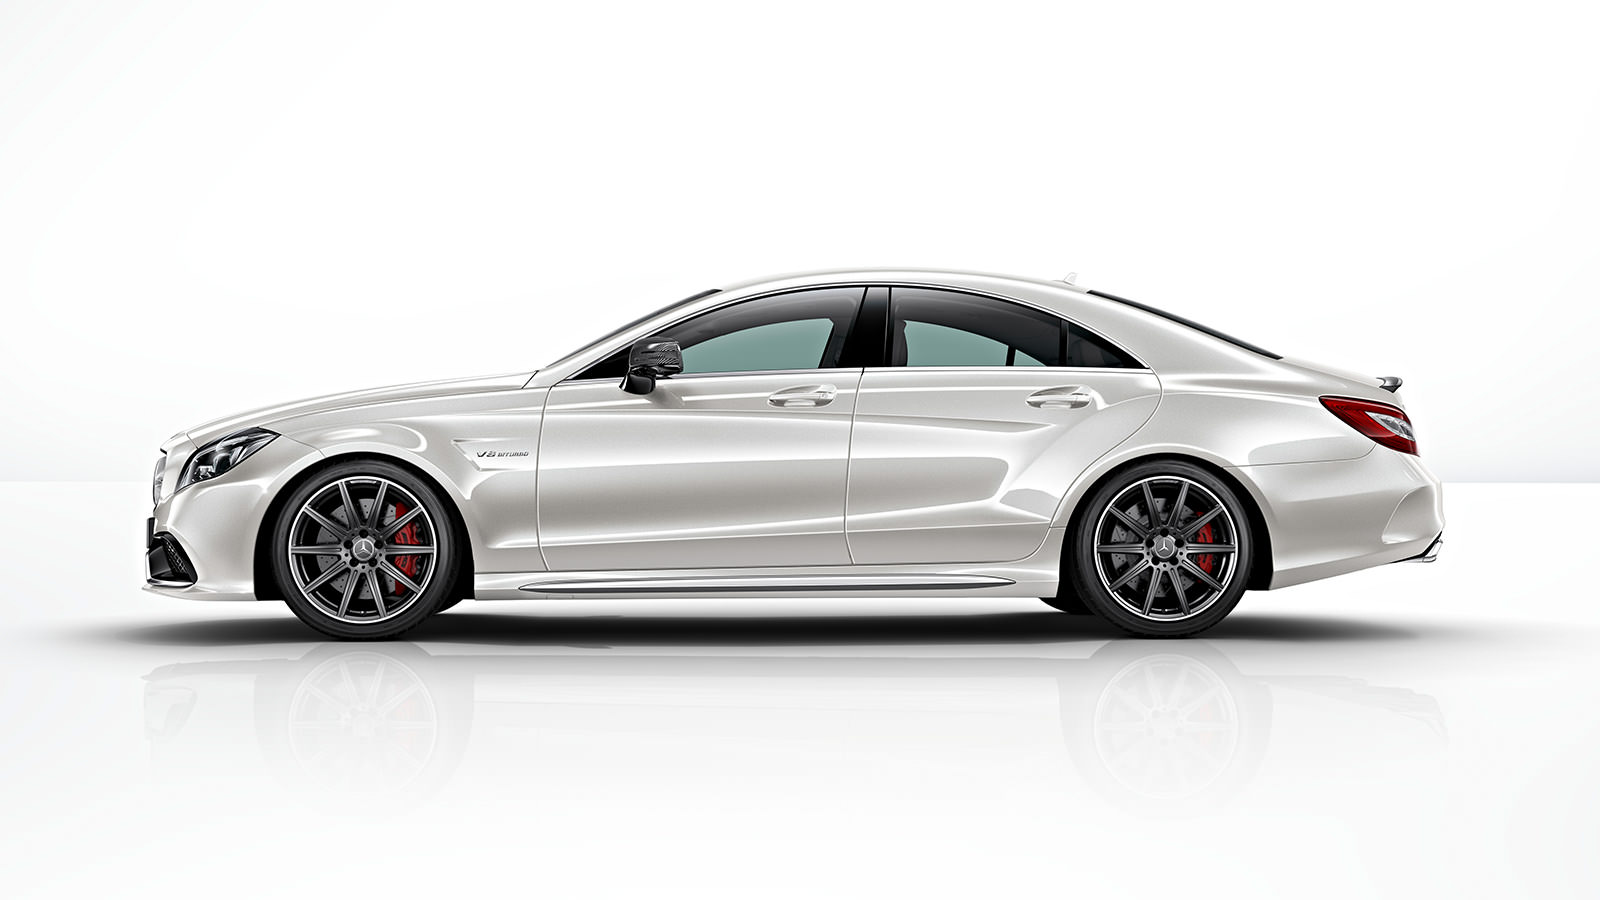 Mercedes Benz AMG CLS 63 S side view